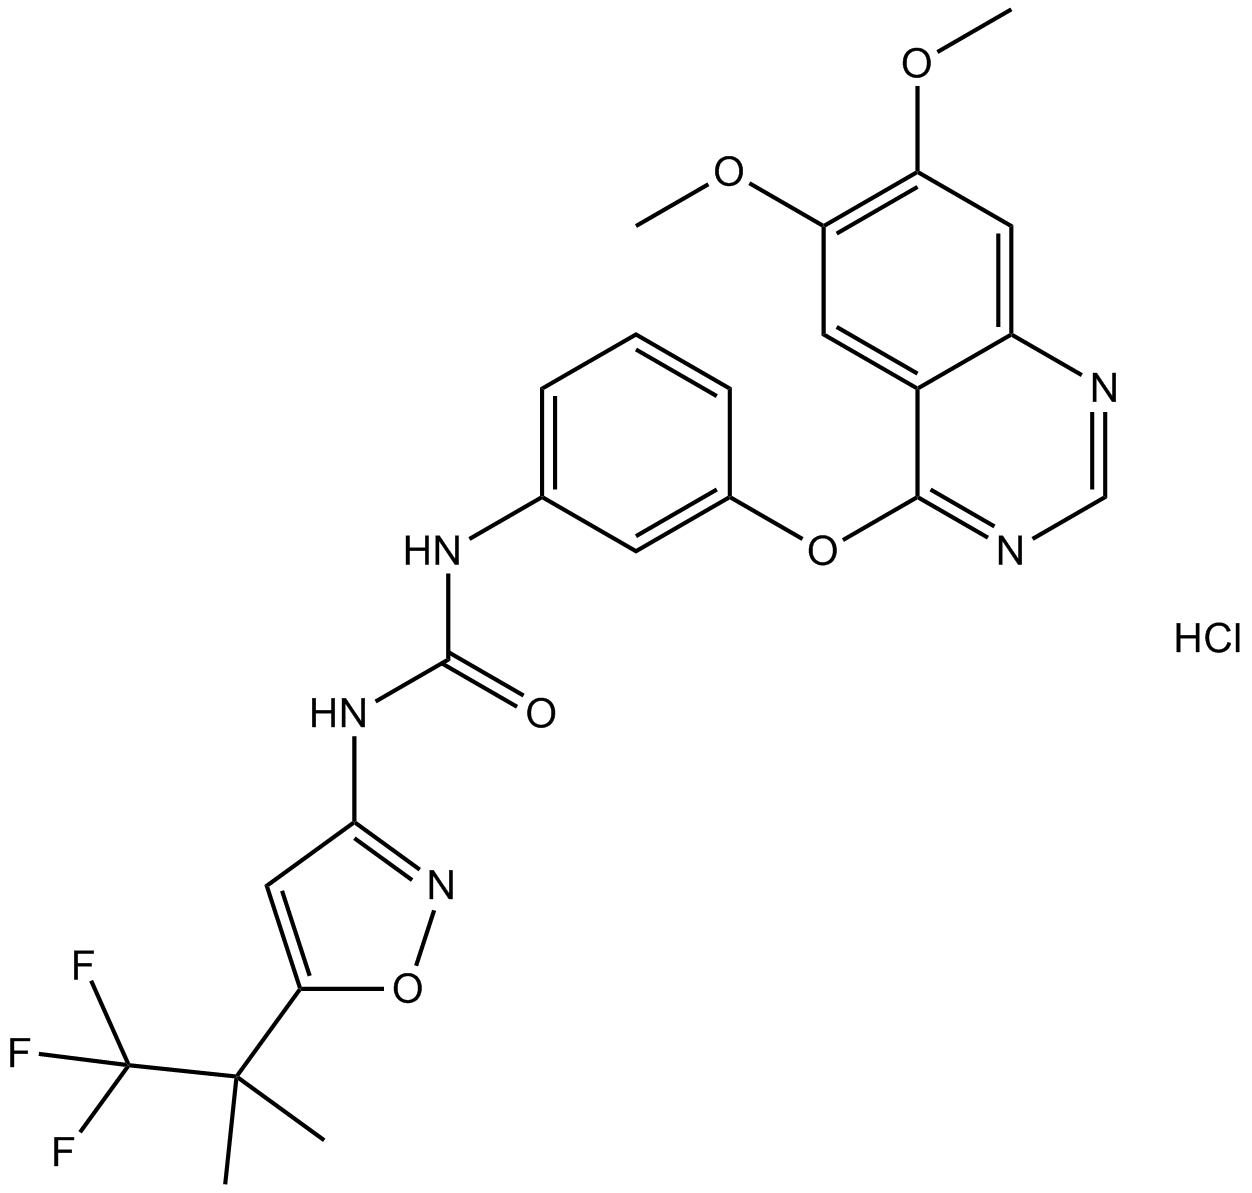 CEP-32496 hydrochloride  Chemical Structure